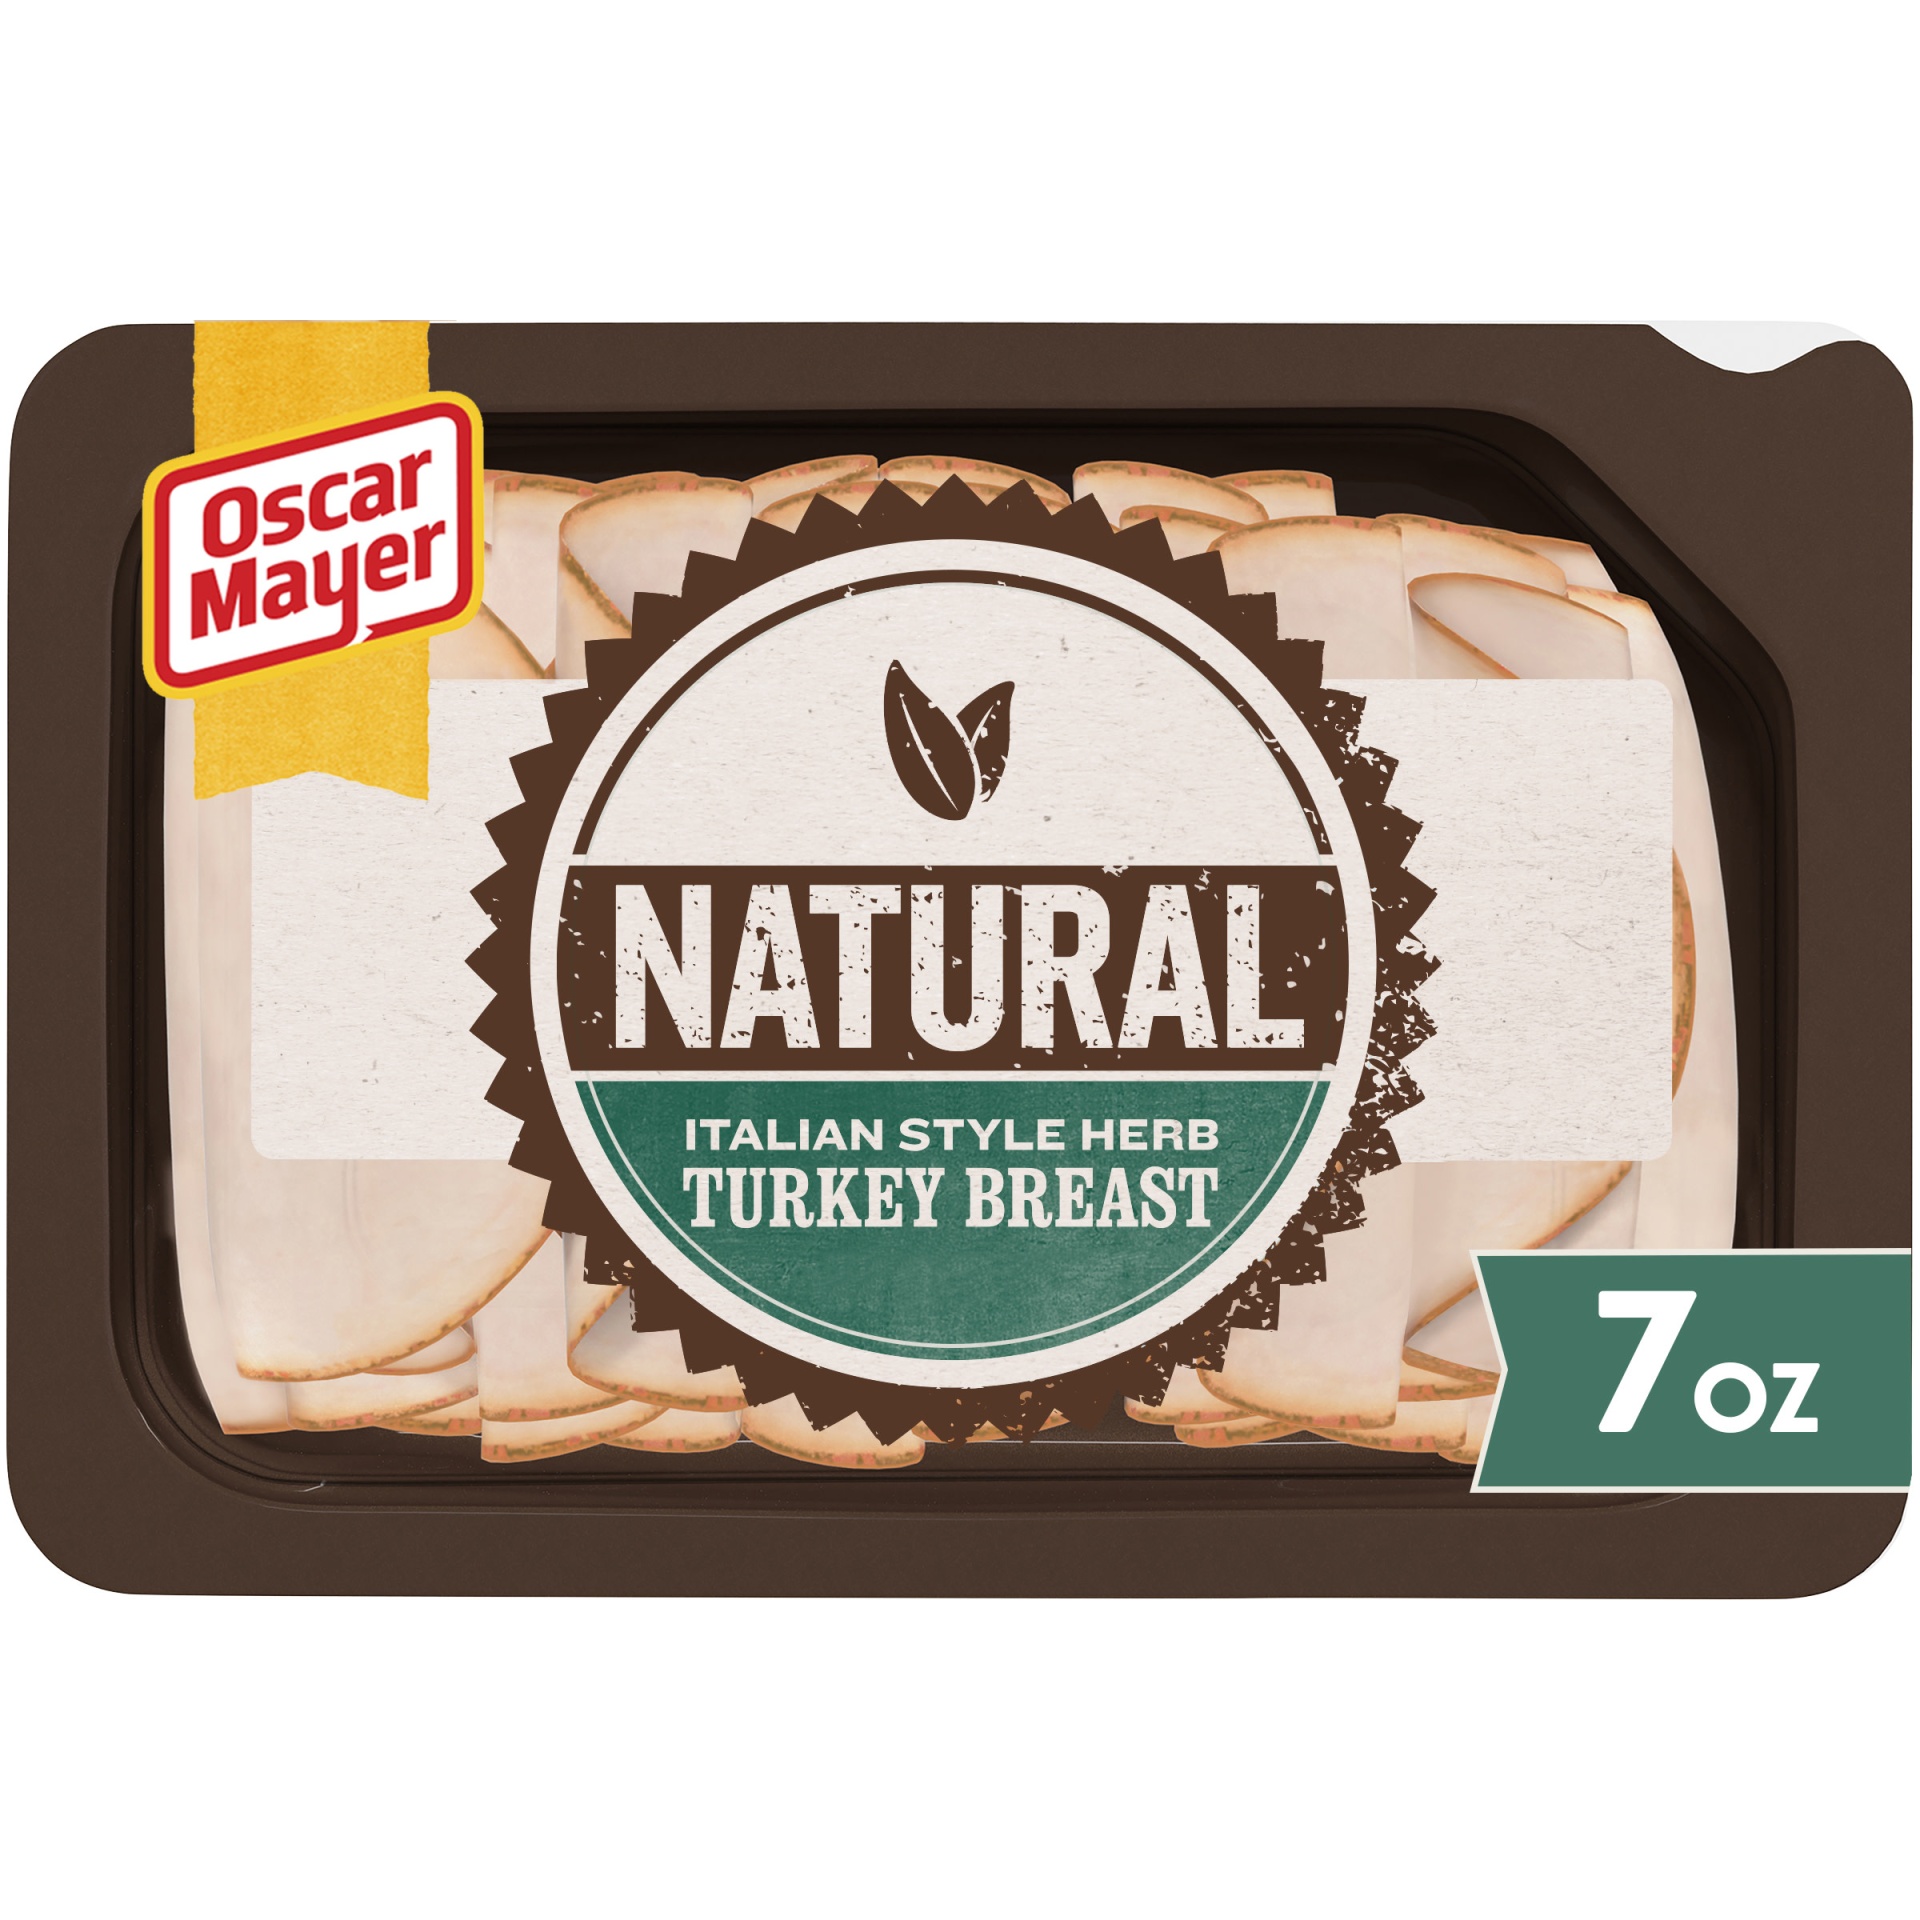 slide 1 of 2, Oscar Mayer Natural Italian Style Herb Turkey Breast Sliced Lunch Meat Tray, 7 oz